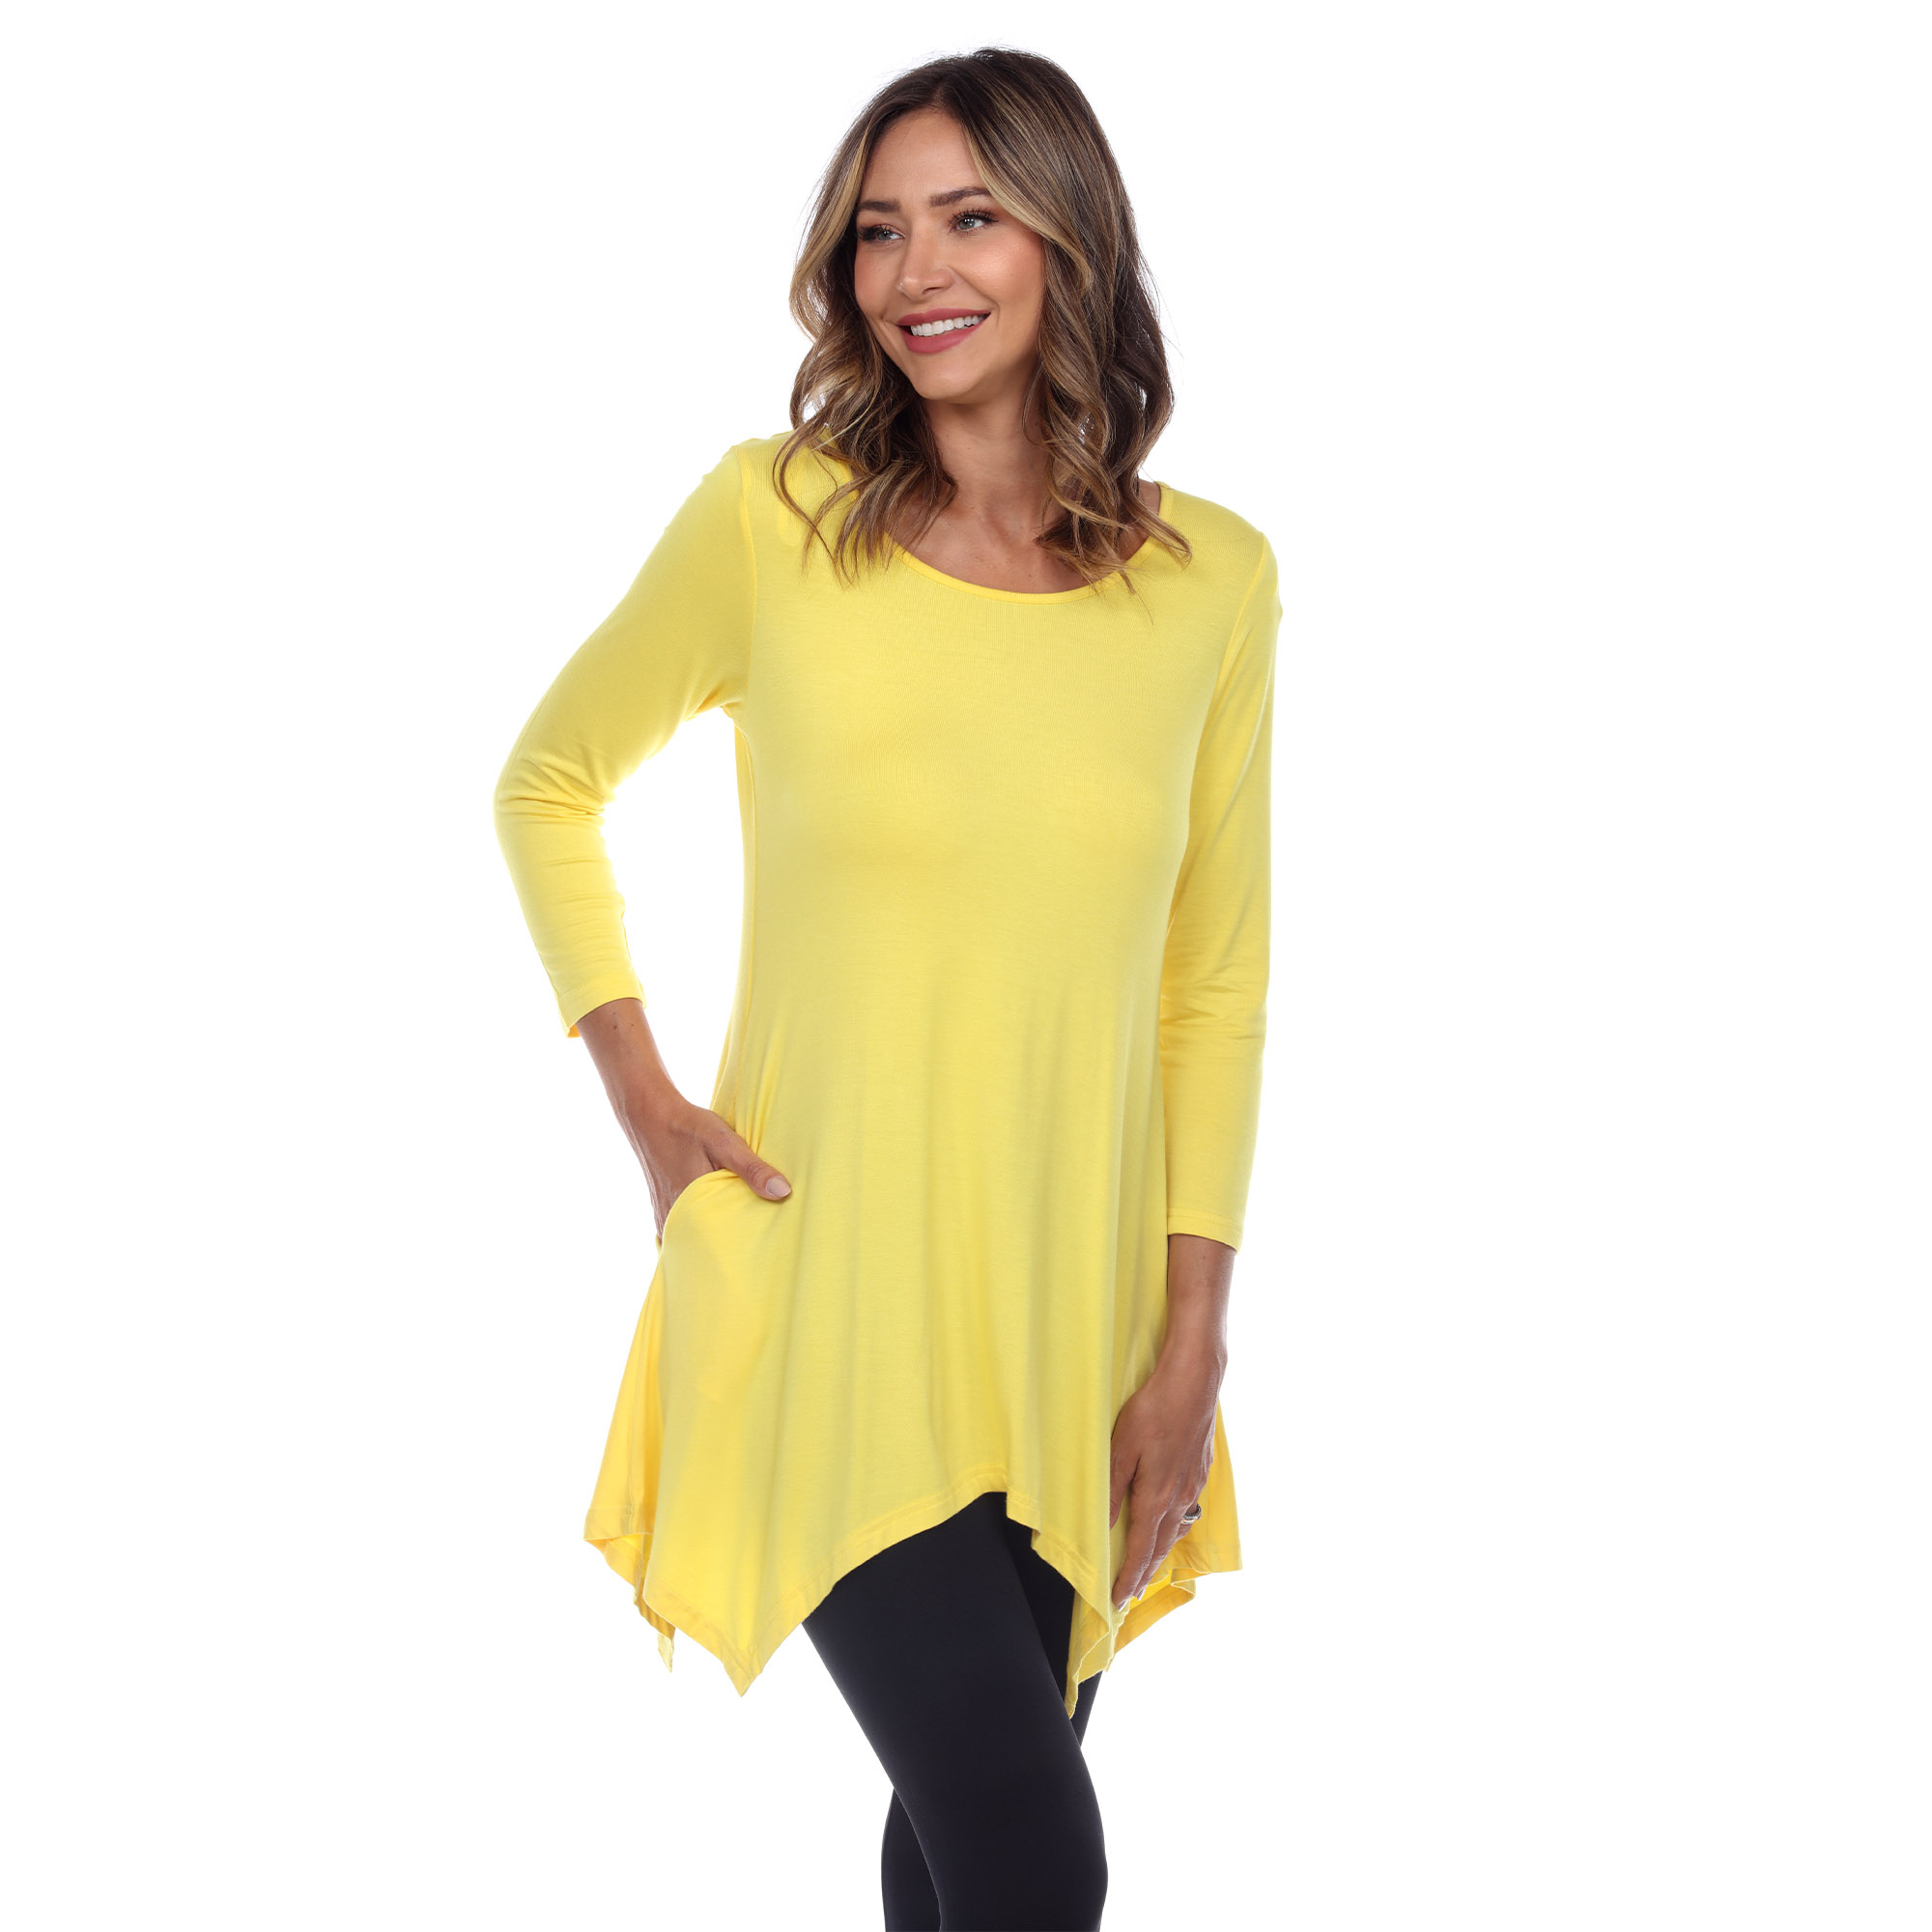 White Mark Women's Quarter Sleeve Tunic Top With Pockets - Yellow, Small